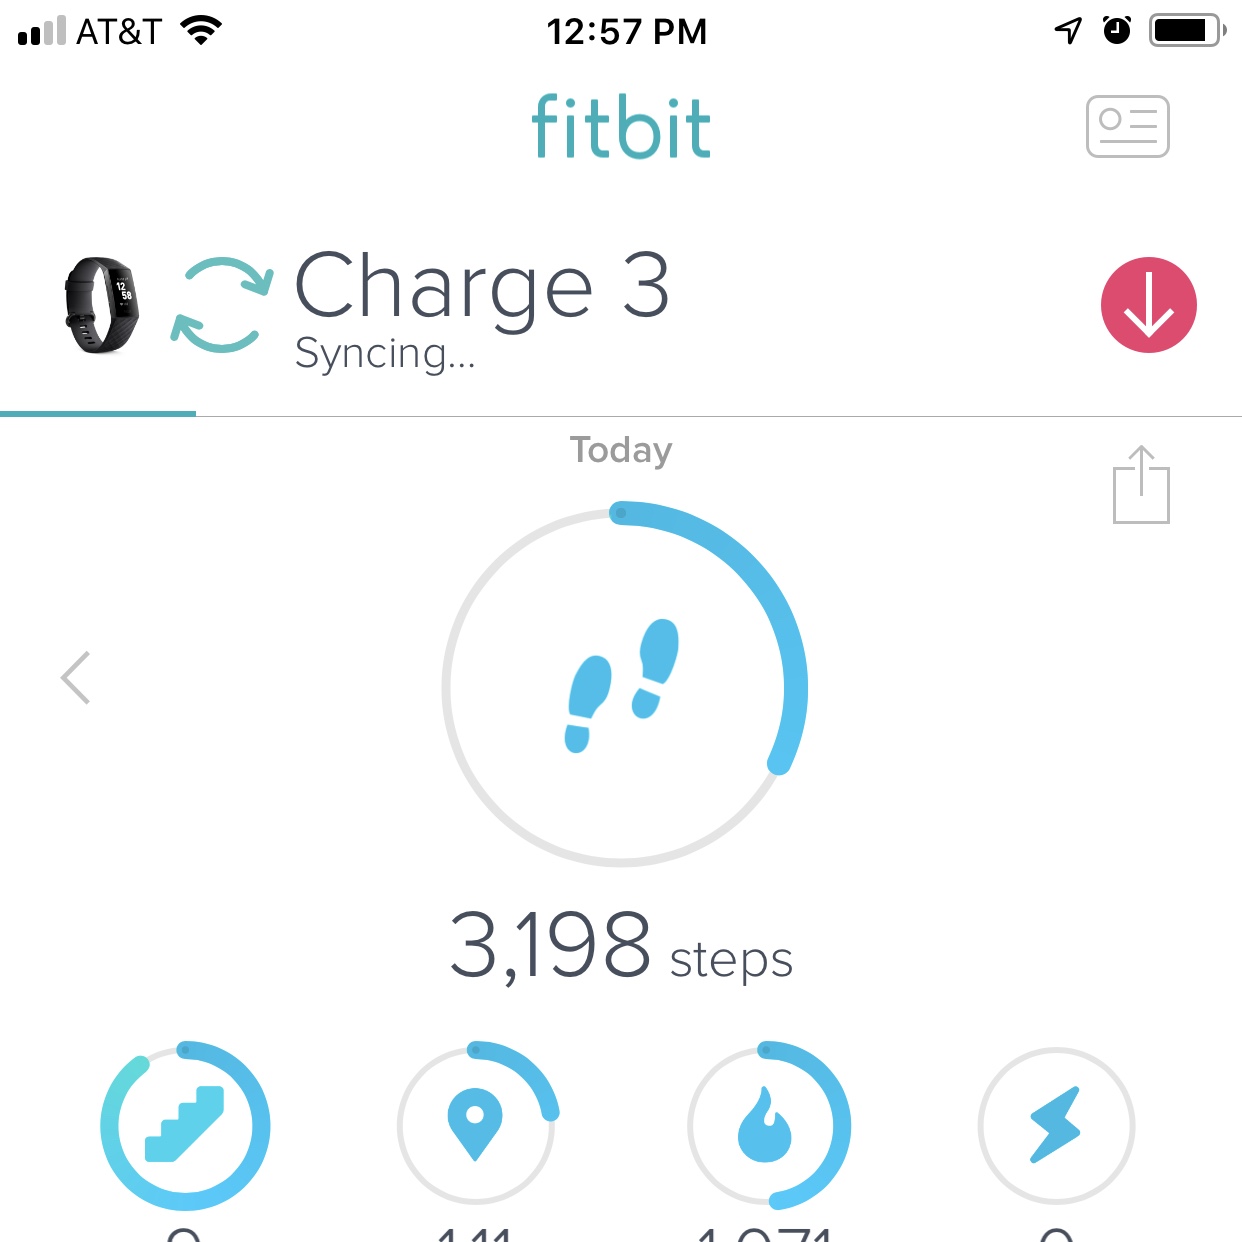 fitbit charge 3 sync with iphone